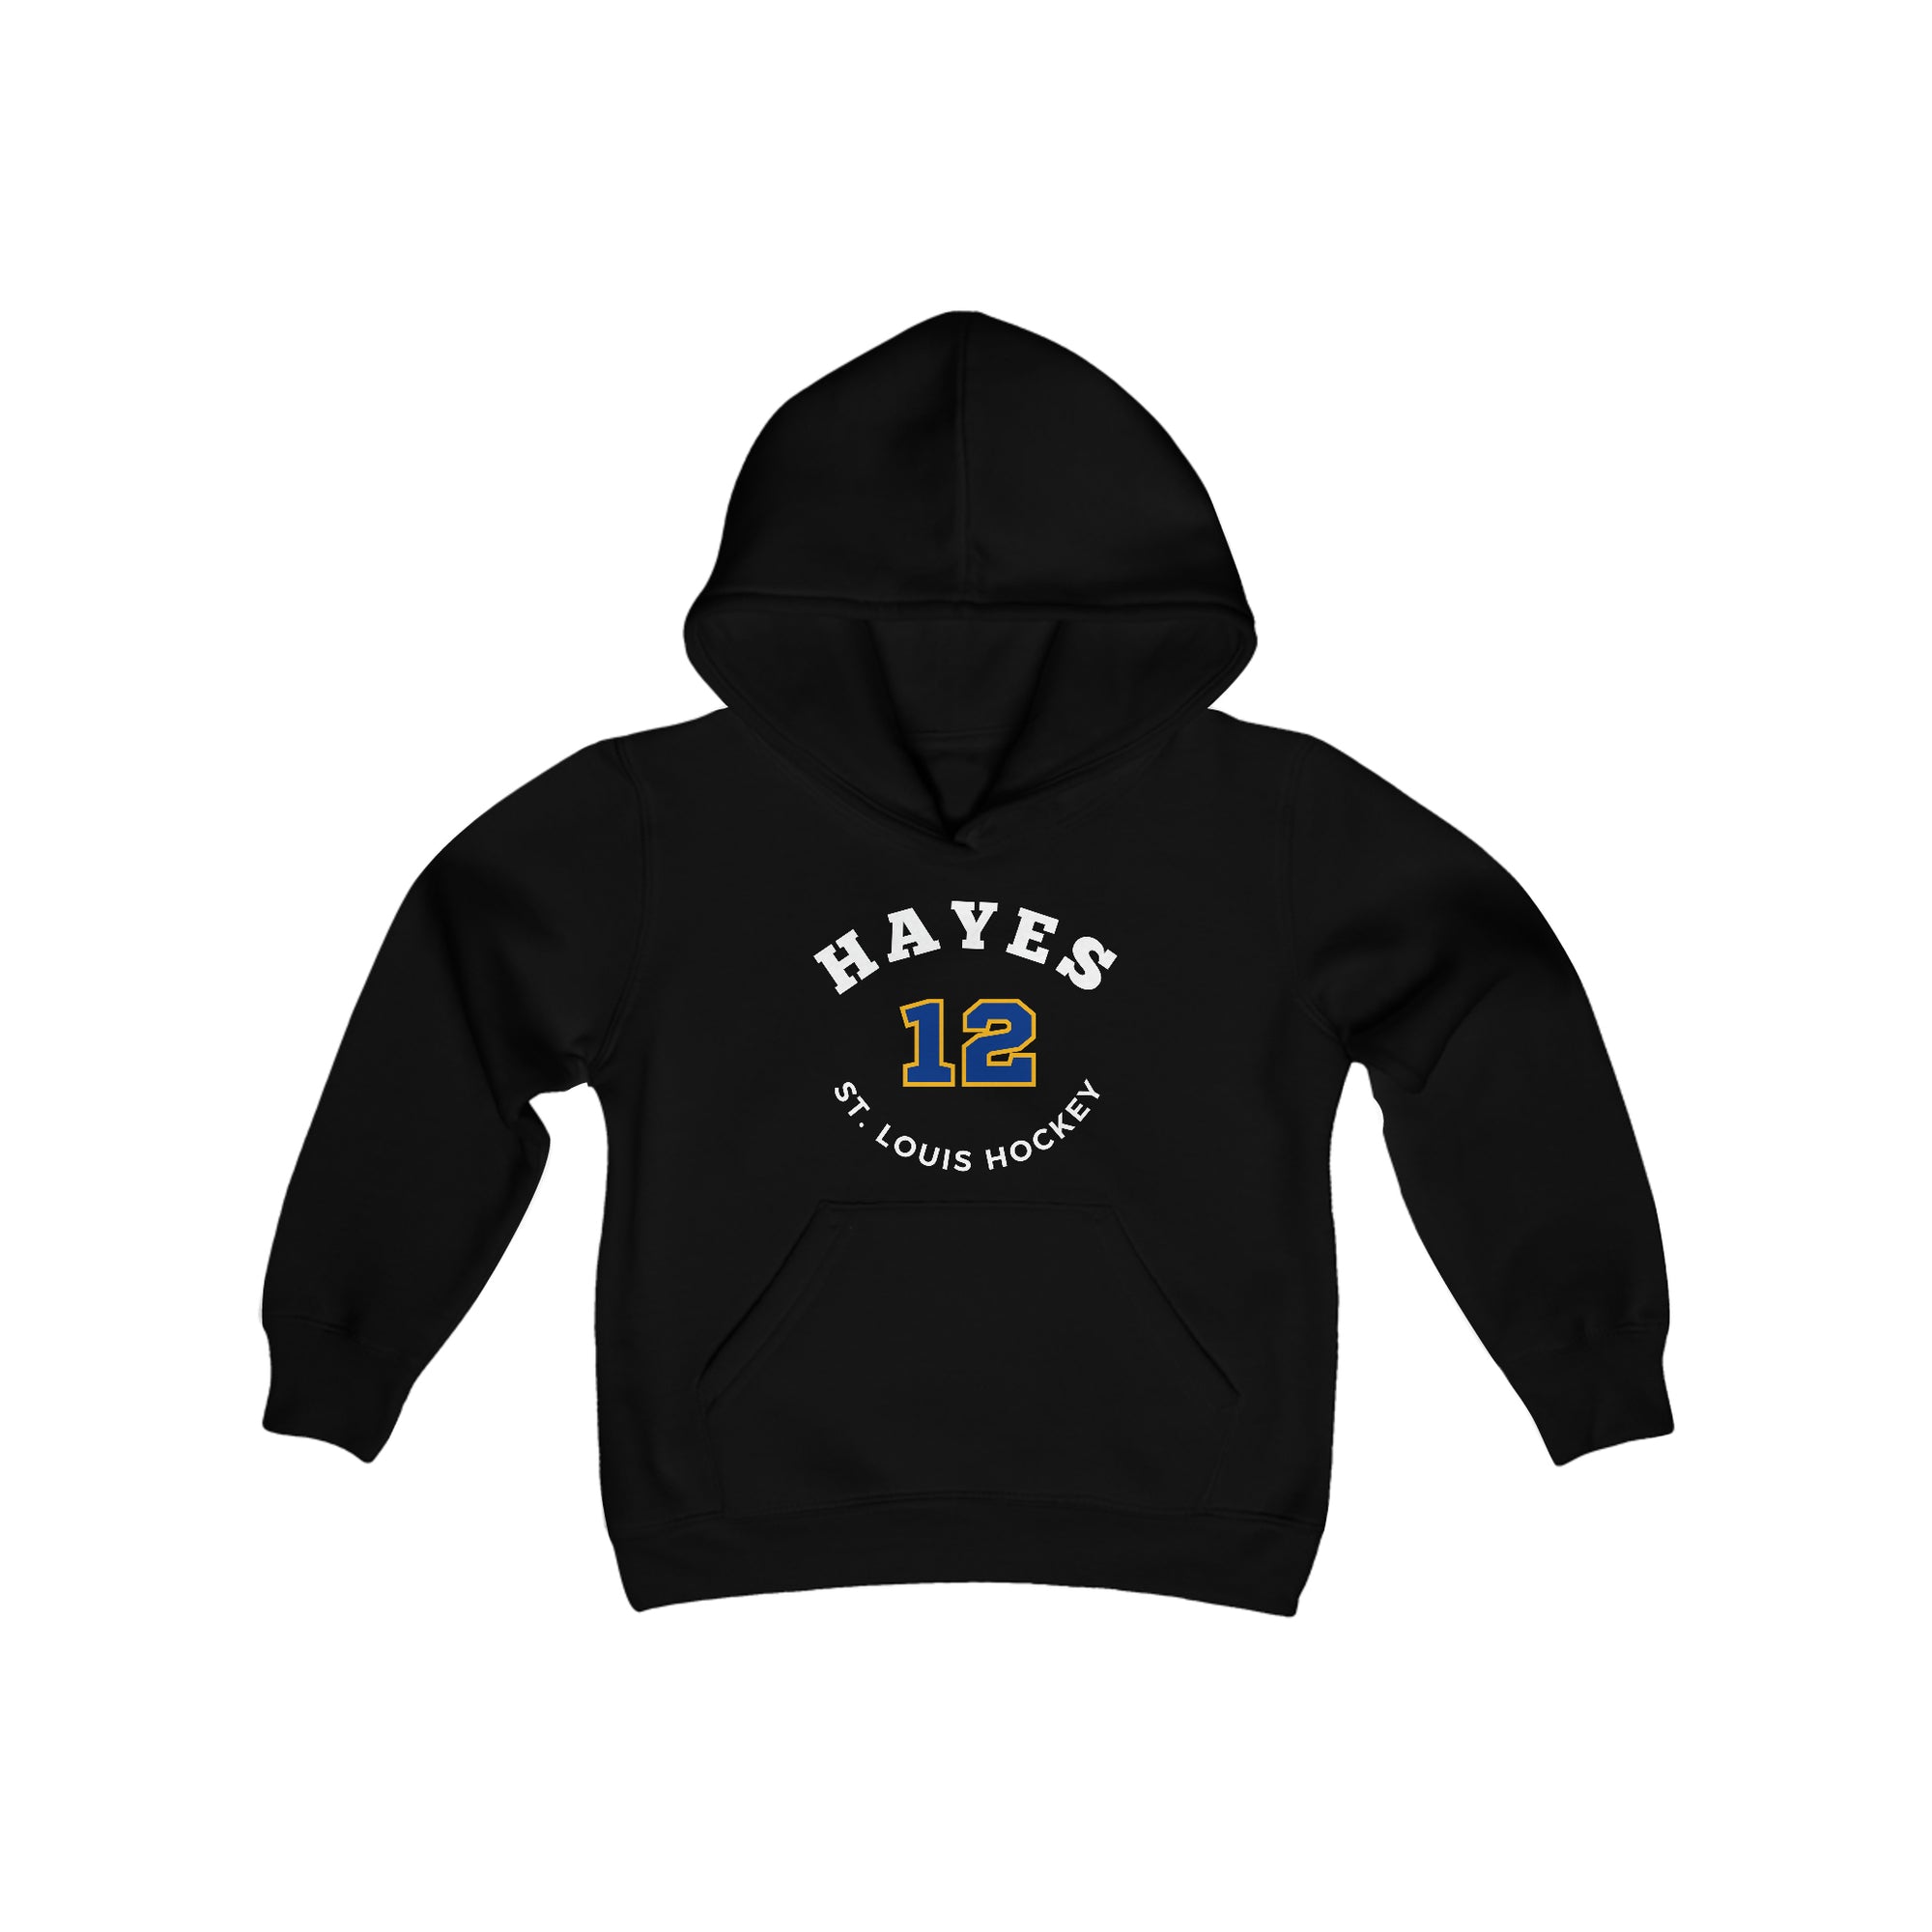 Hayes 12 St. Louis Hockey Number Arch Design Youth Hooded Sweatshirt